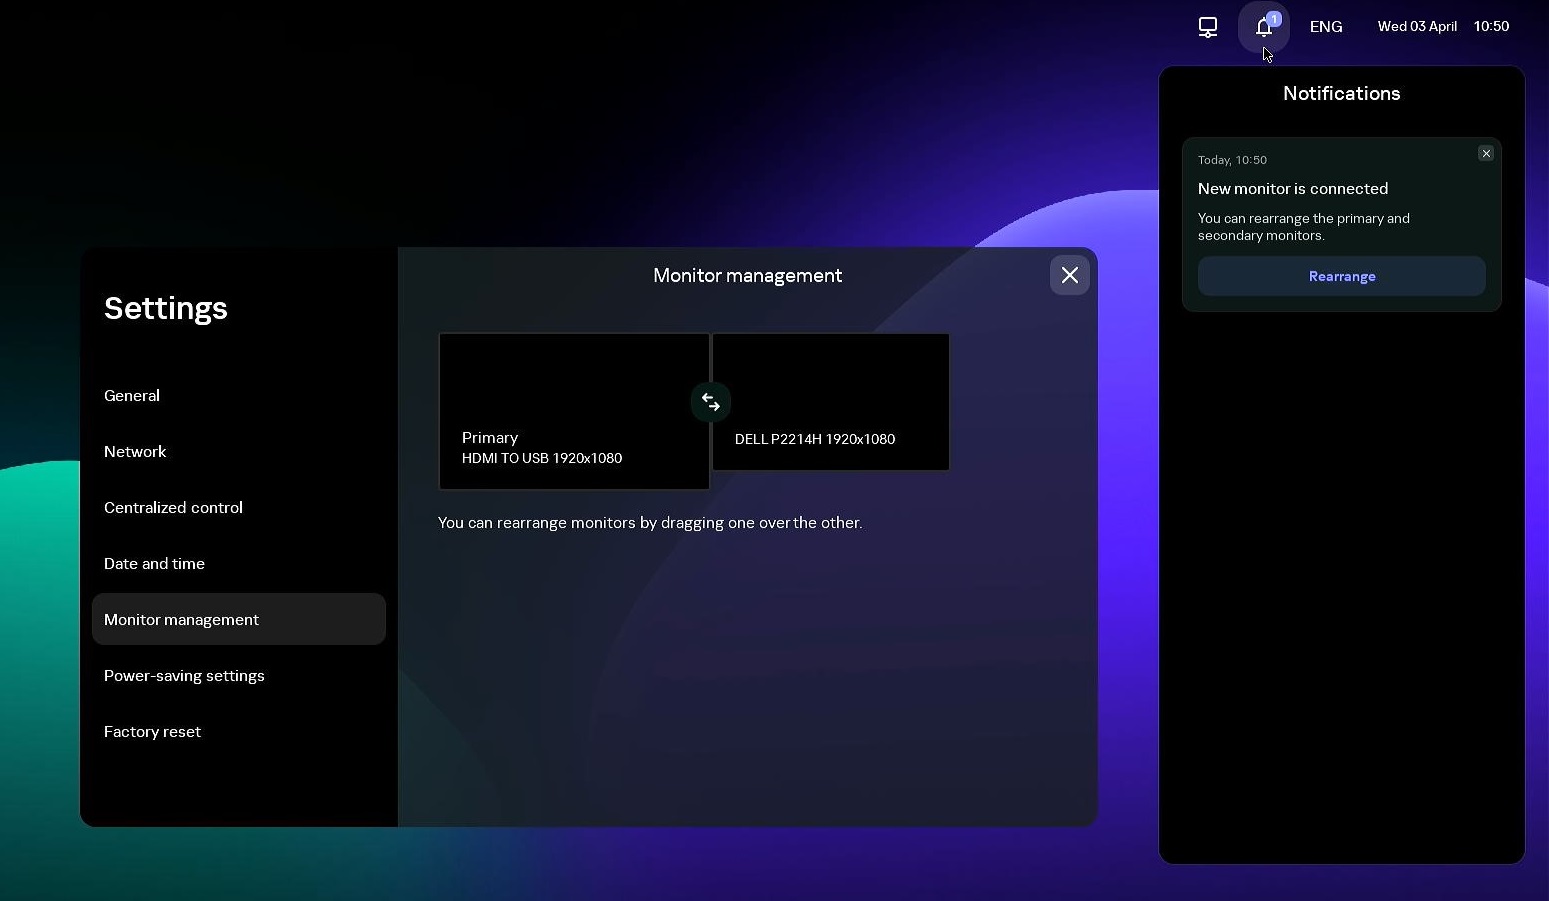 Screenshot of the Kaspersky Thin Client screen with the opened notifications panel.